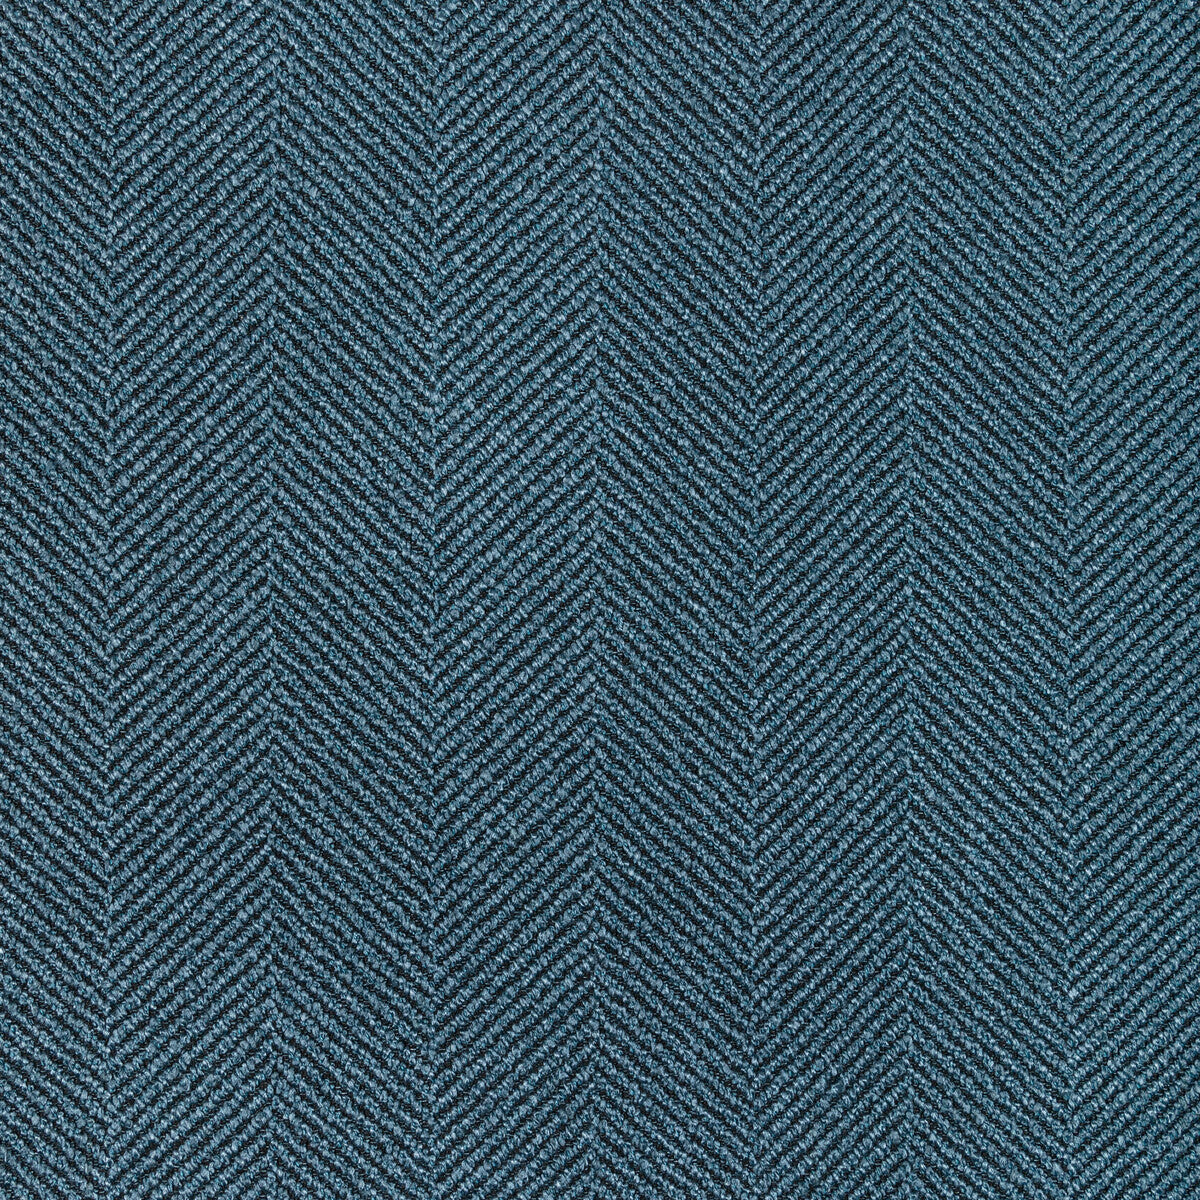 Reprise fabric in tempest color - pattern 36568.5.0 - by Kravet Contract in the Seaqual collection